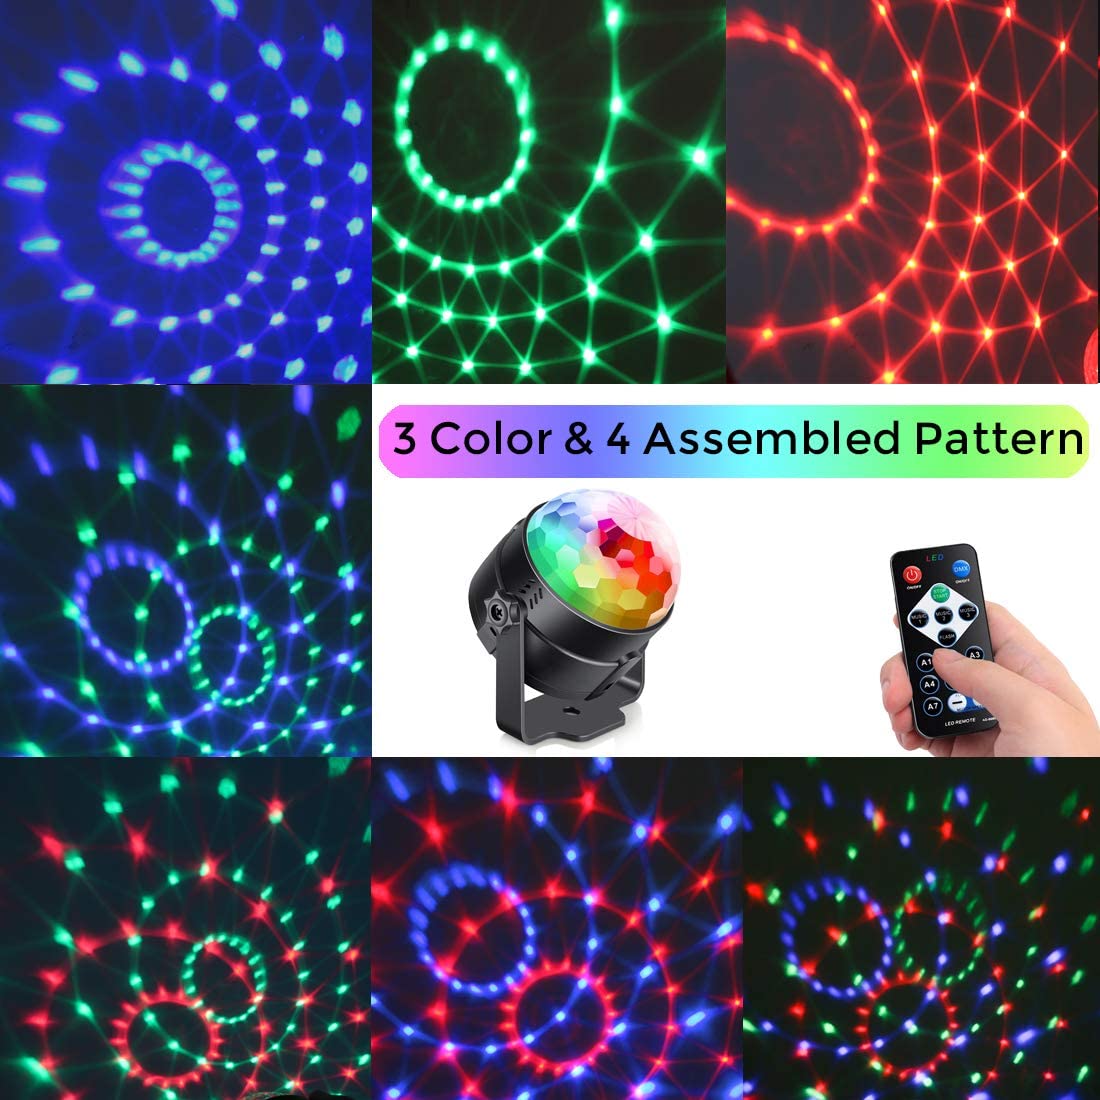 Sound Activated Party Lights with Remote Control Dj Lighting, RGB Disco Ball, Strobe Lamp 7 Modes